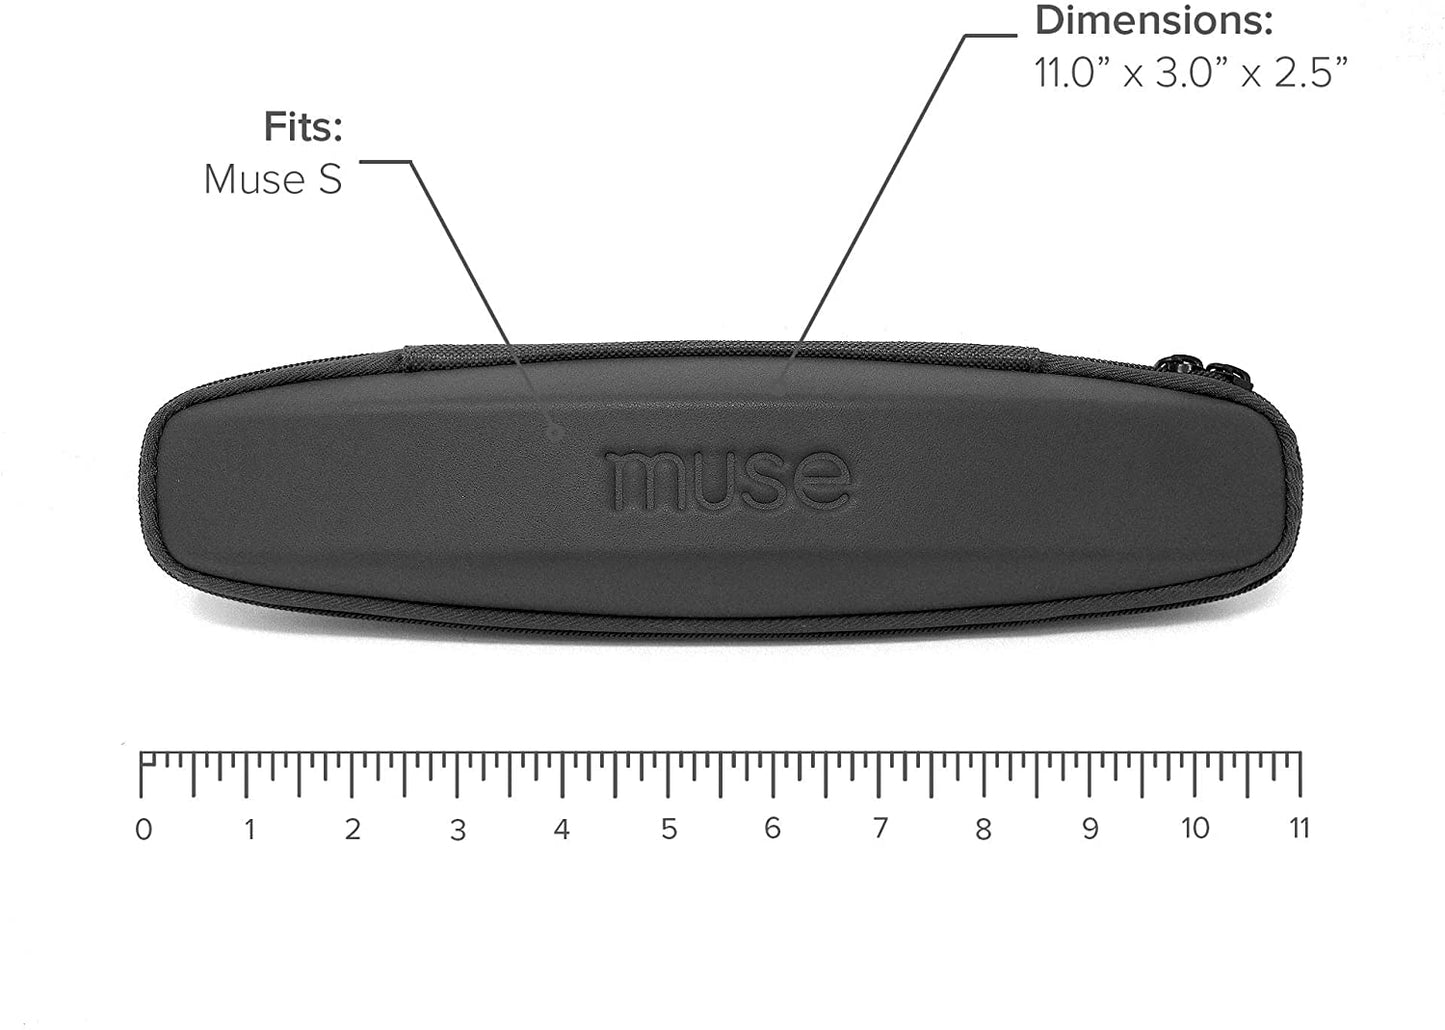 Muse S Case